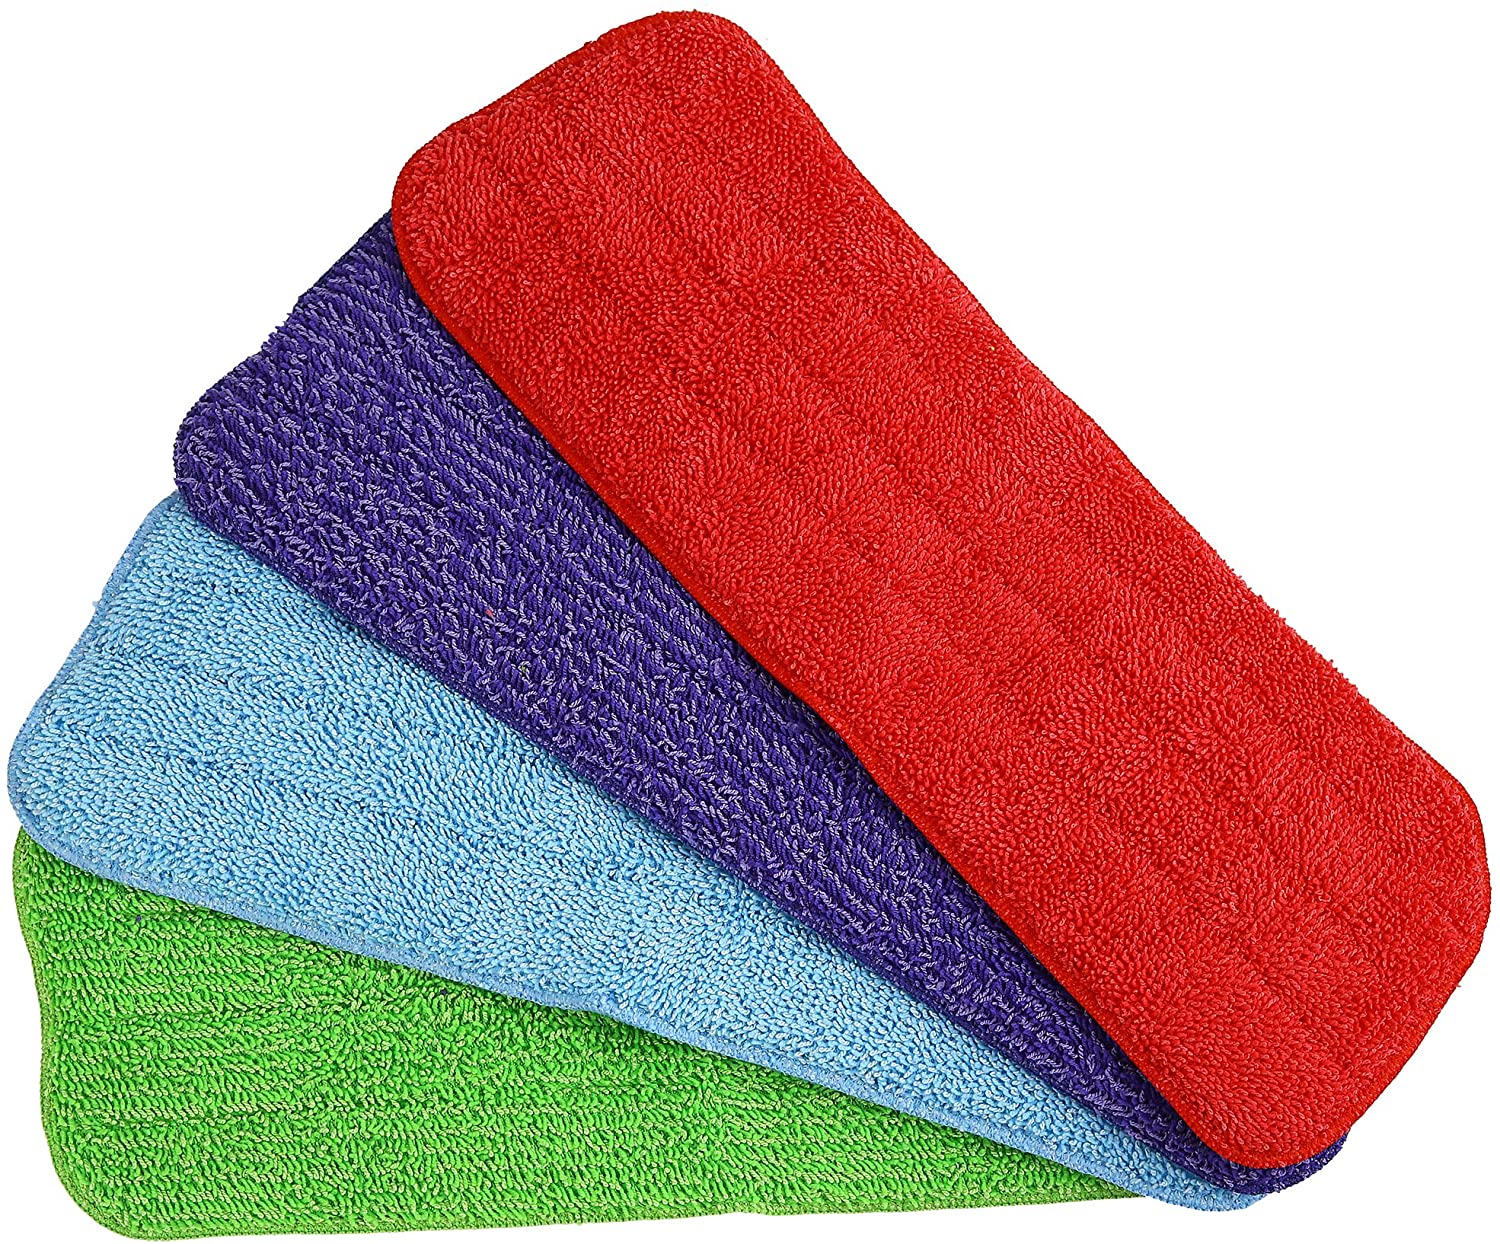 Microfiber flat mop replacement pads for Spray Mops and Reveal Mops Wet Mop Dry Mop